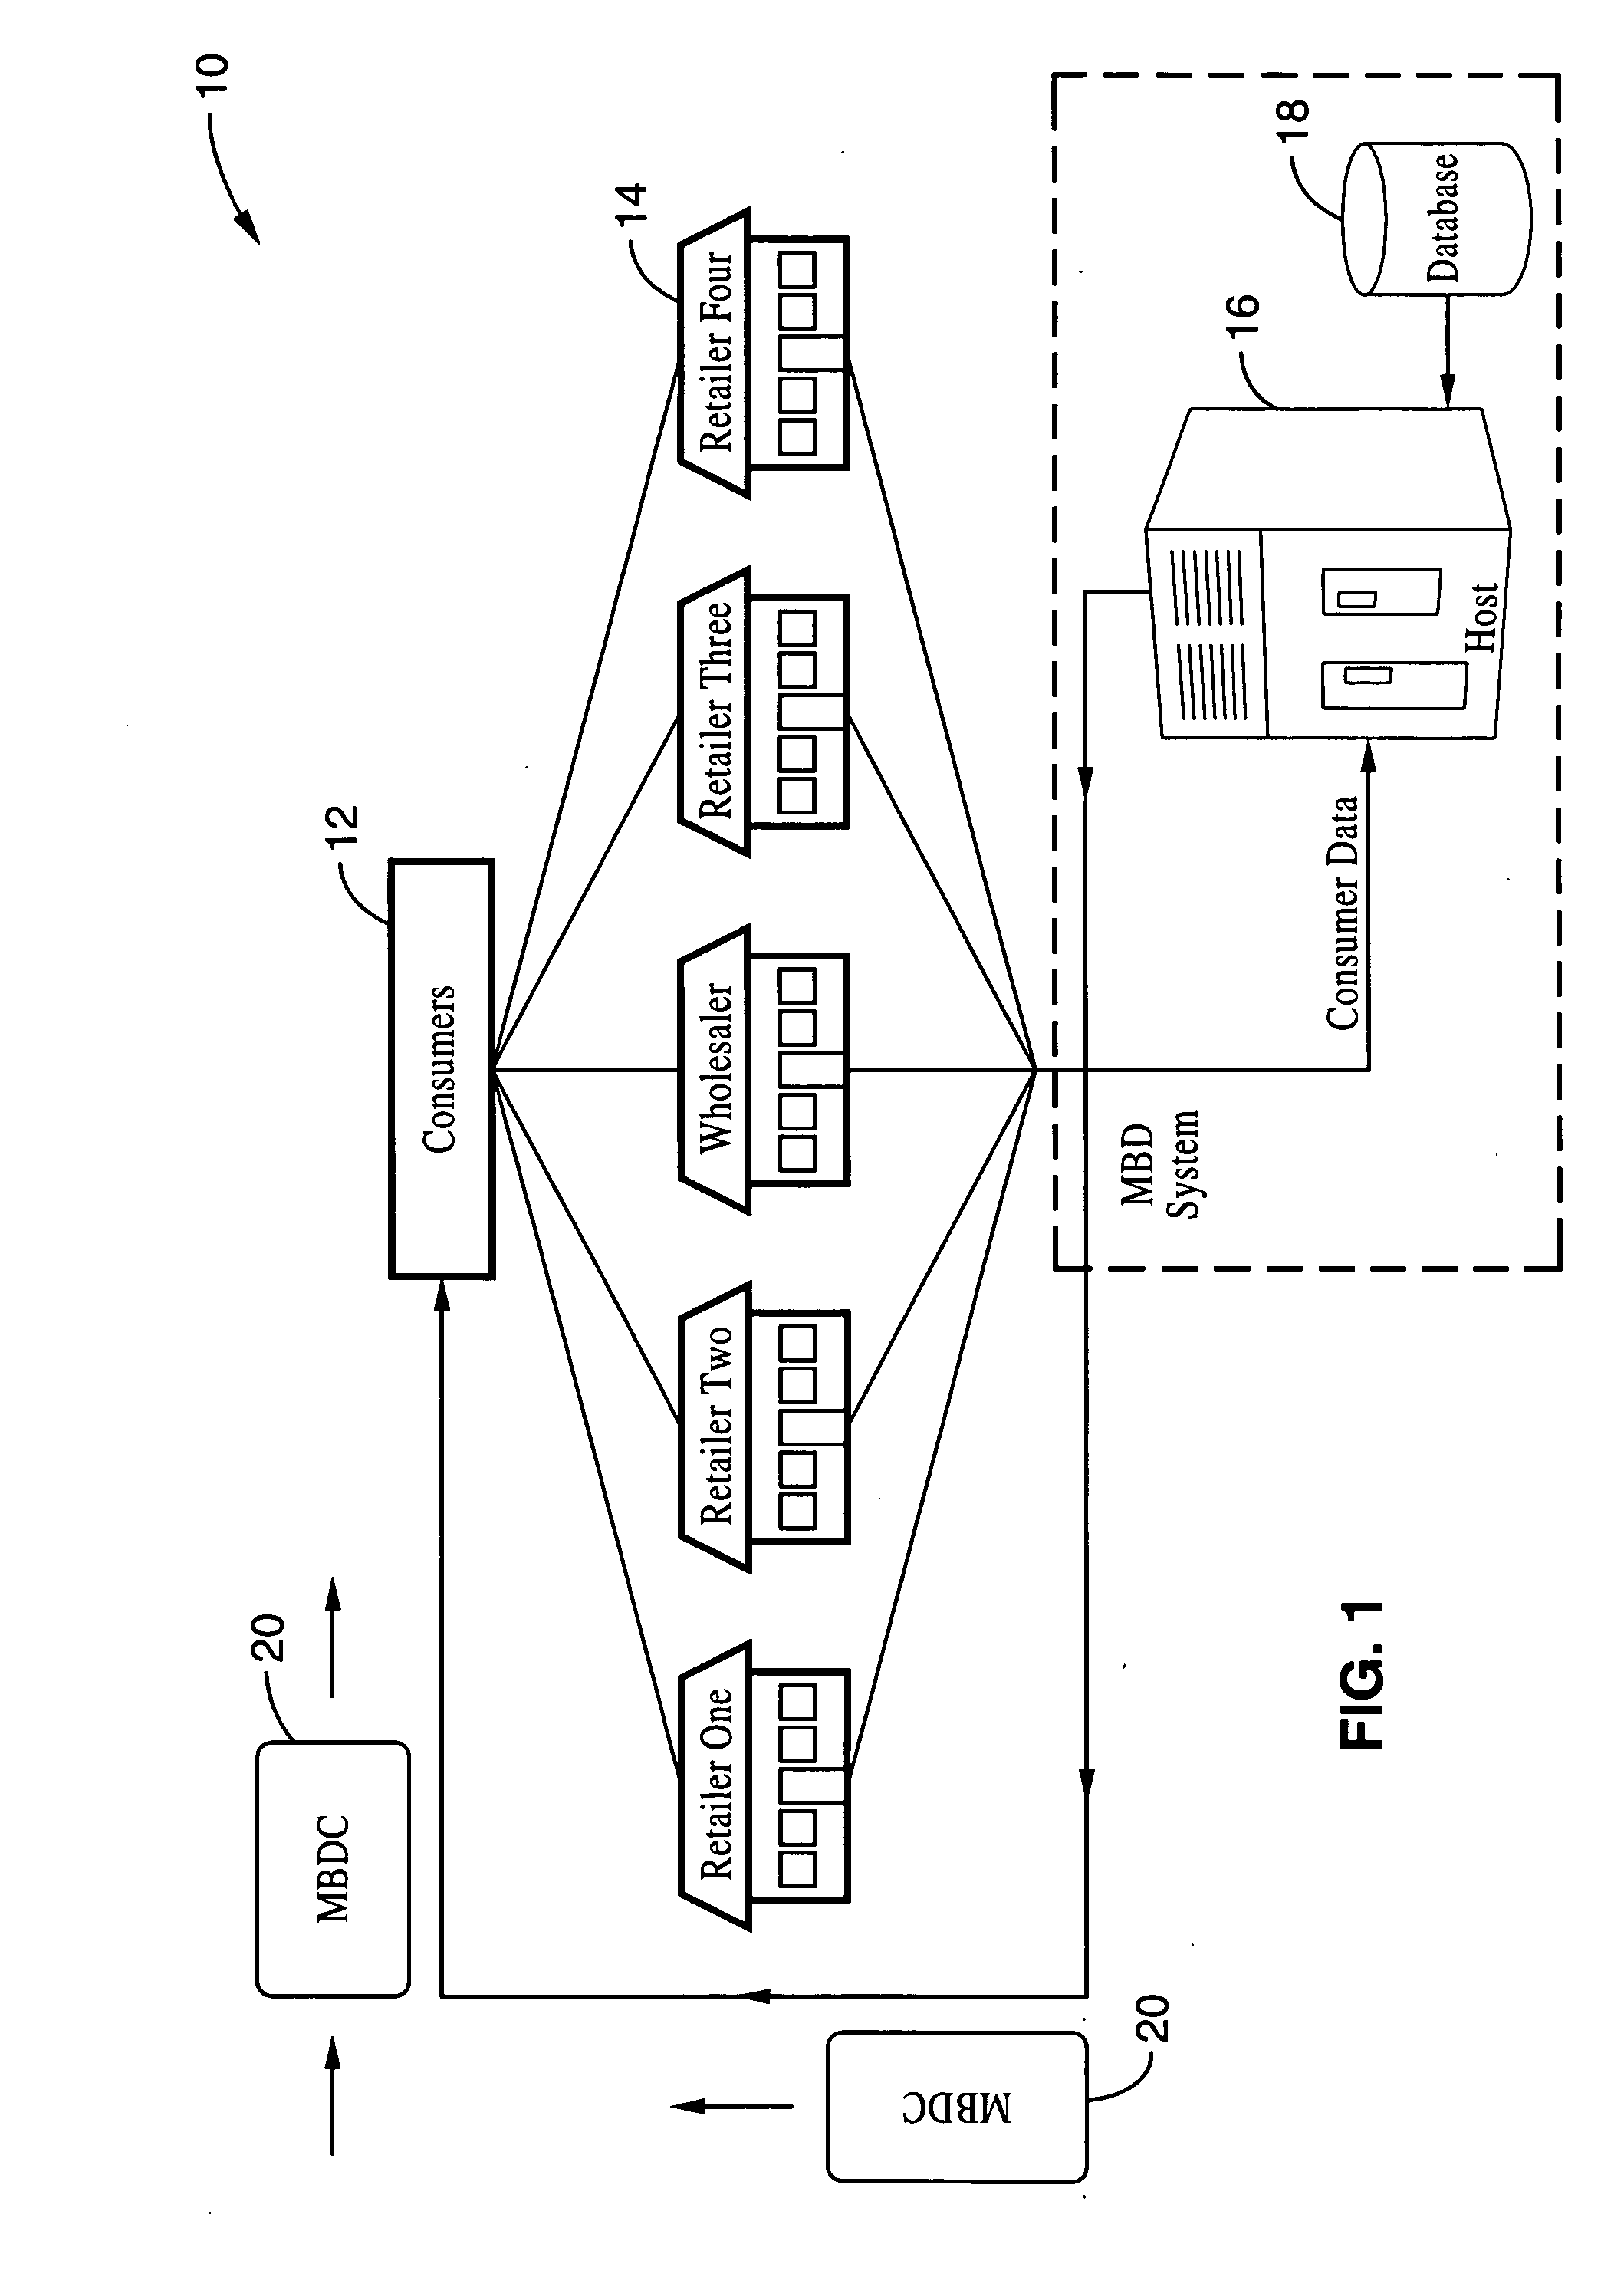 Method and system for facilitating electronic funds transactions